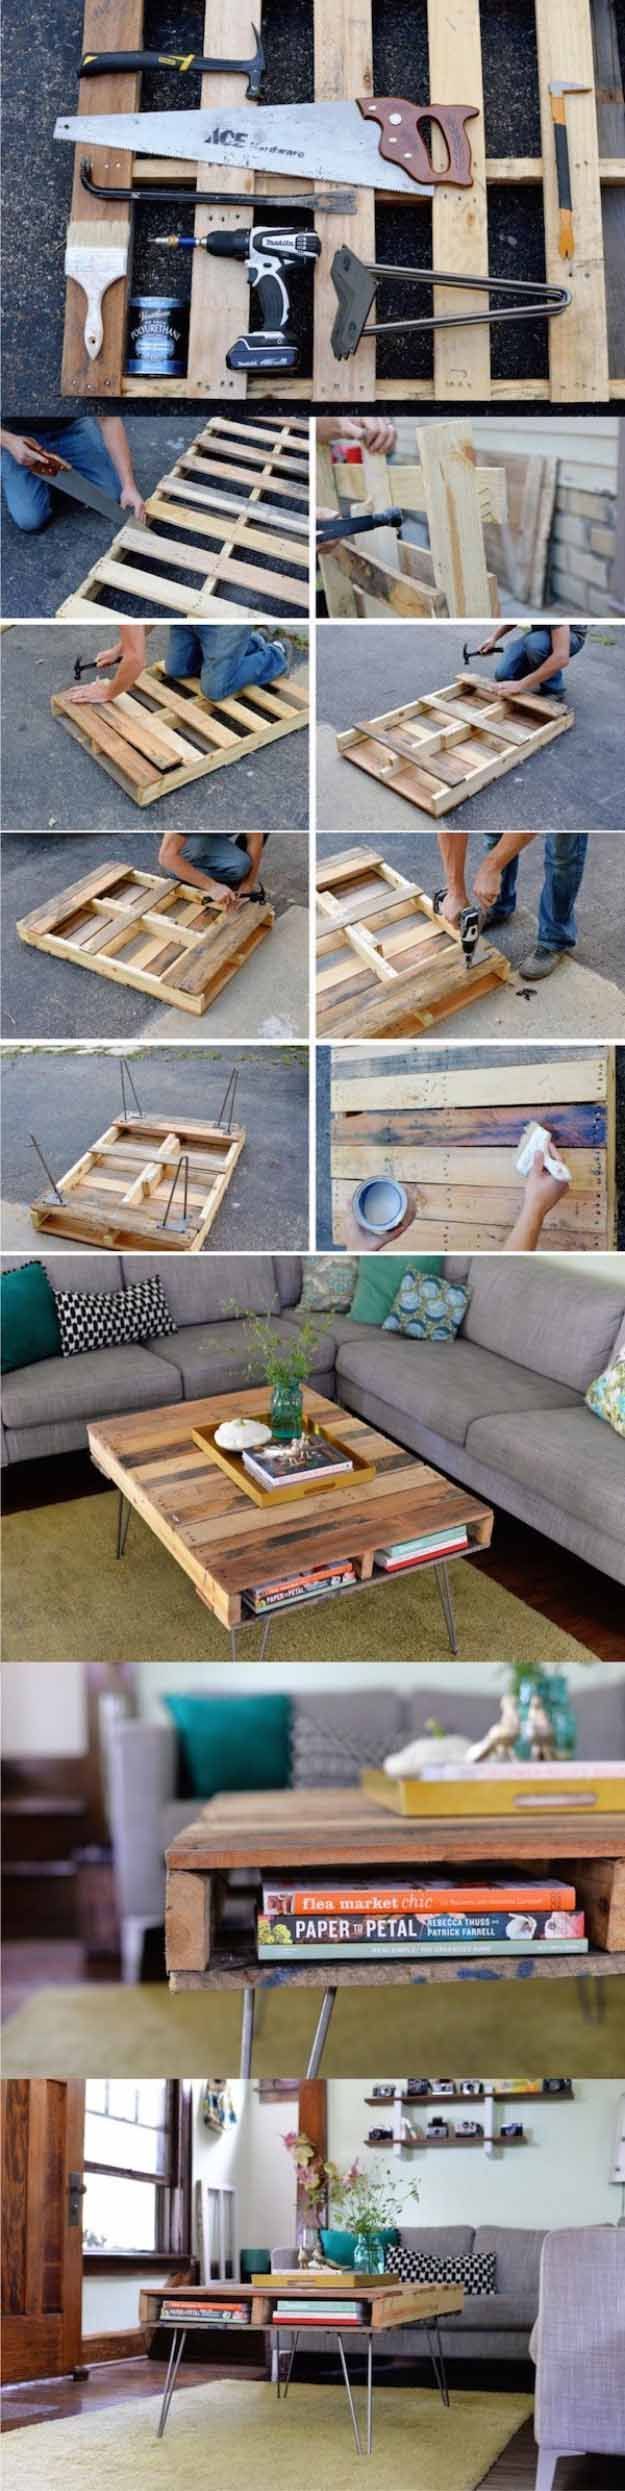 Easy DIY Home Decor Projects| DIY Pallet Furniture Tutorial | Cheap Coffee Table Ideas | DIY Projects and Crafts by DIY JOY  at